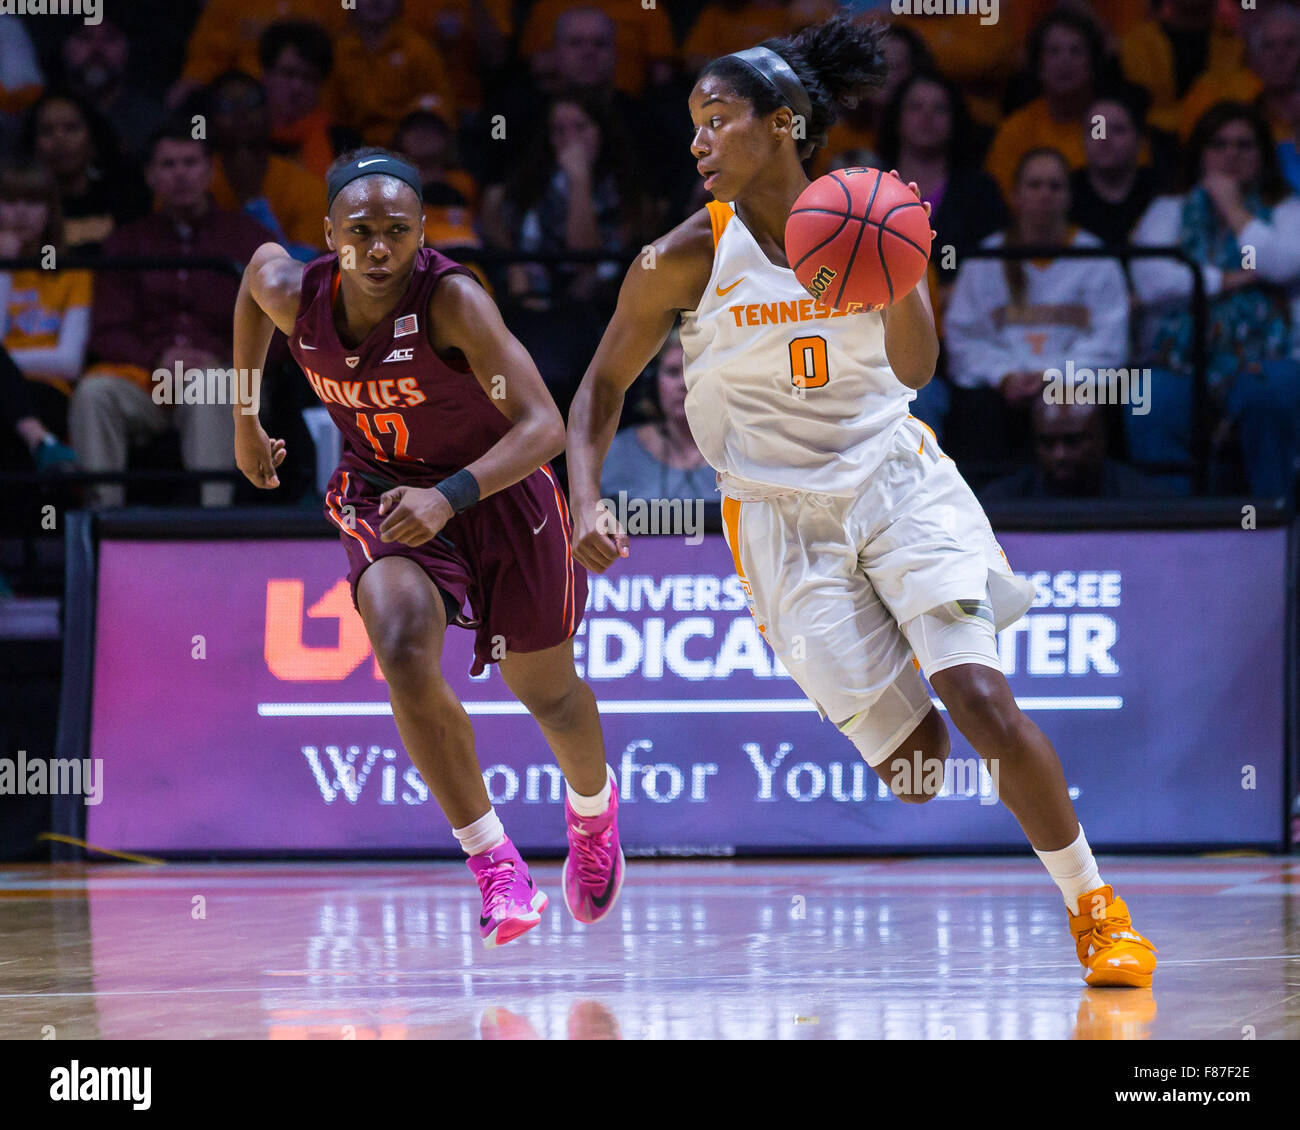 December 6, 2015: Jordan Reynolds #0 of the Tennessee Lady Volunteers brings the ball up court while Chanette Hicks #12 of the Virginia Tech Hokies pursues during the NCAA basketball game between the University of Tennessee Lady Volunteers and the Virginia Tech Hokies at Thompson Boling Arena in Knoxville TN Tim Gangloff/CSM Stock Photo